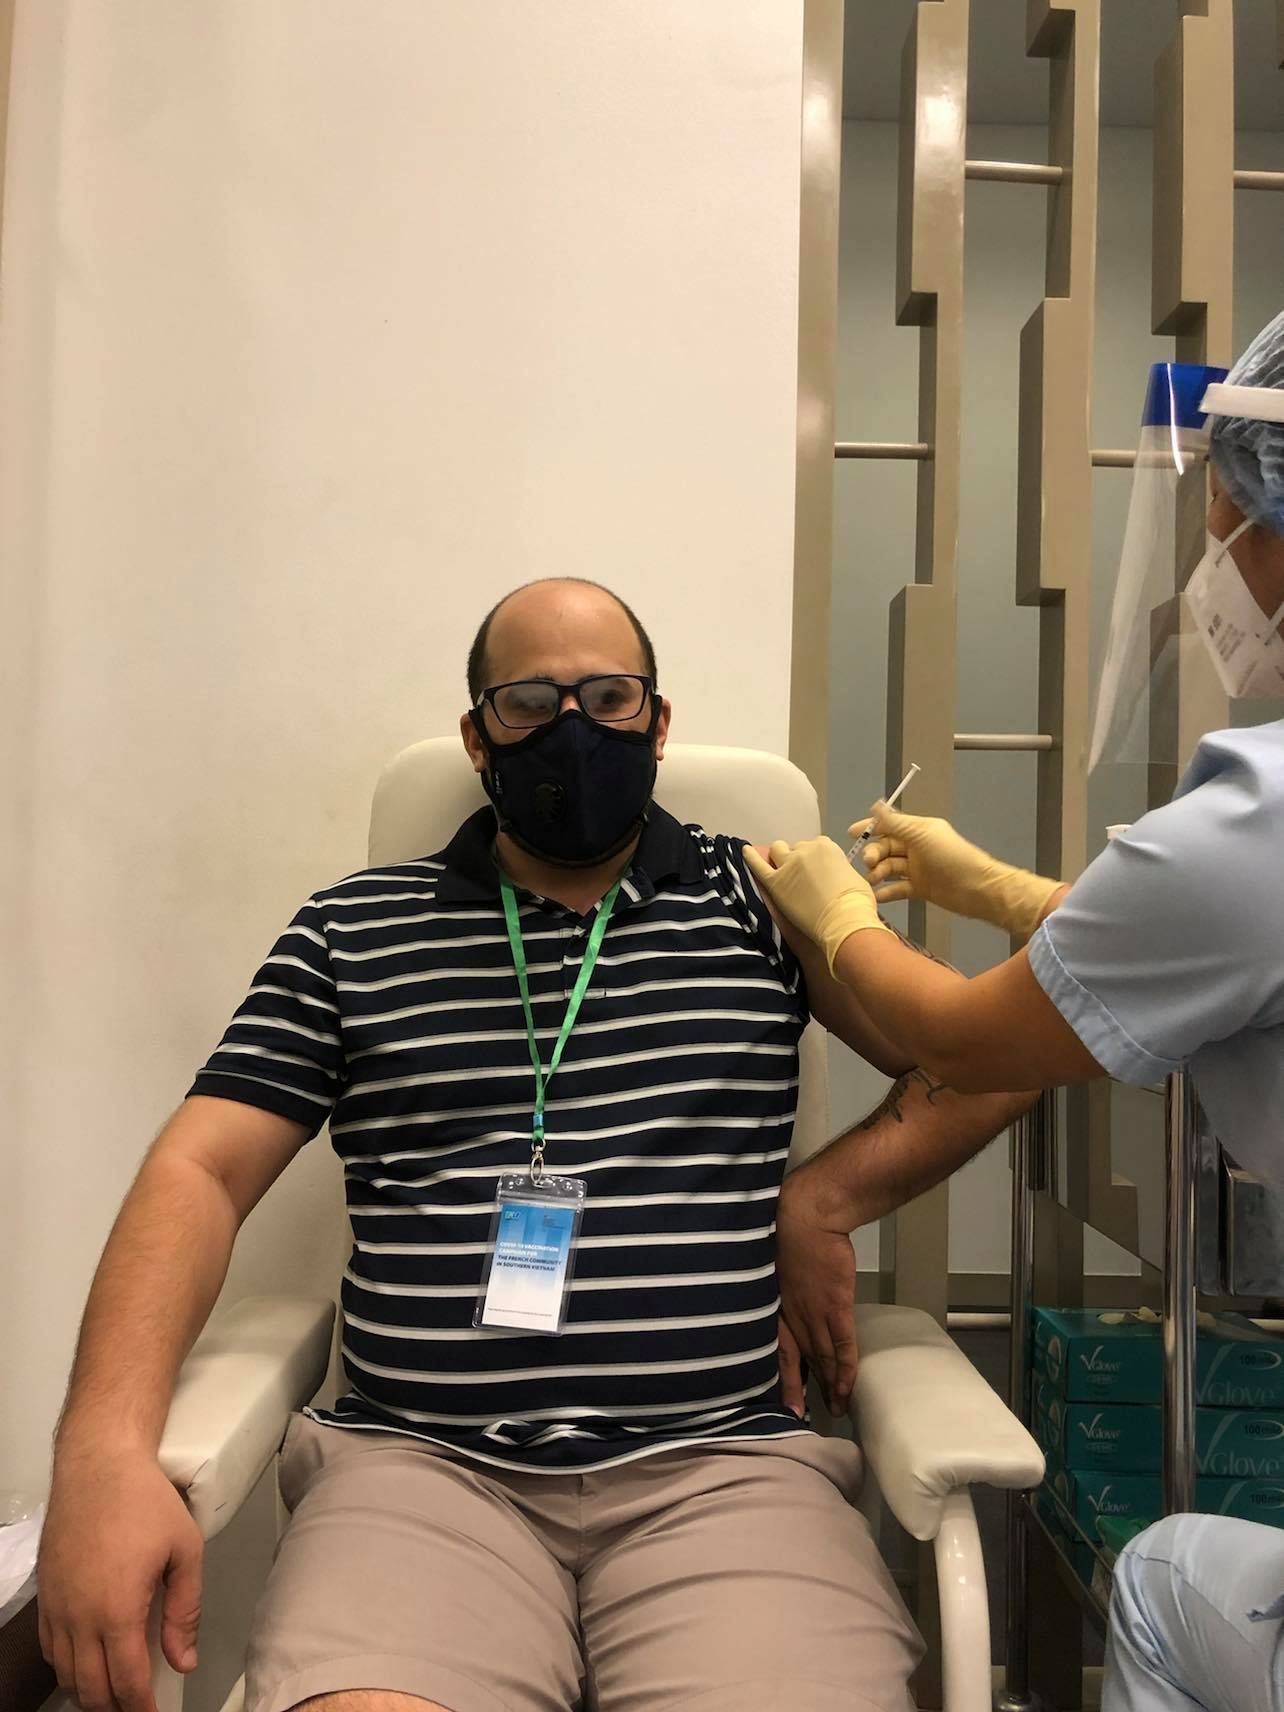 Frenchman Raphael Galuz is getting a Moderna jab against COVID-19 at FV Hospital through a vaccination campaign run by the French Consulate General in Ho Chi Minh City on July 31, 2021. Photo provided by Galuz